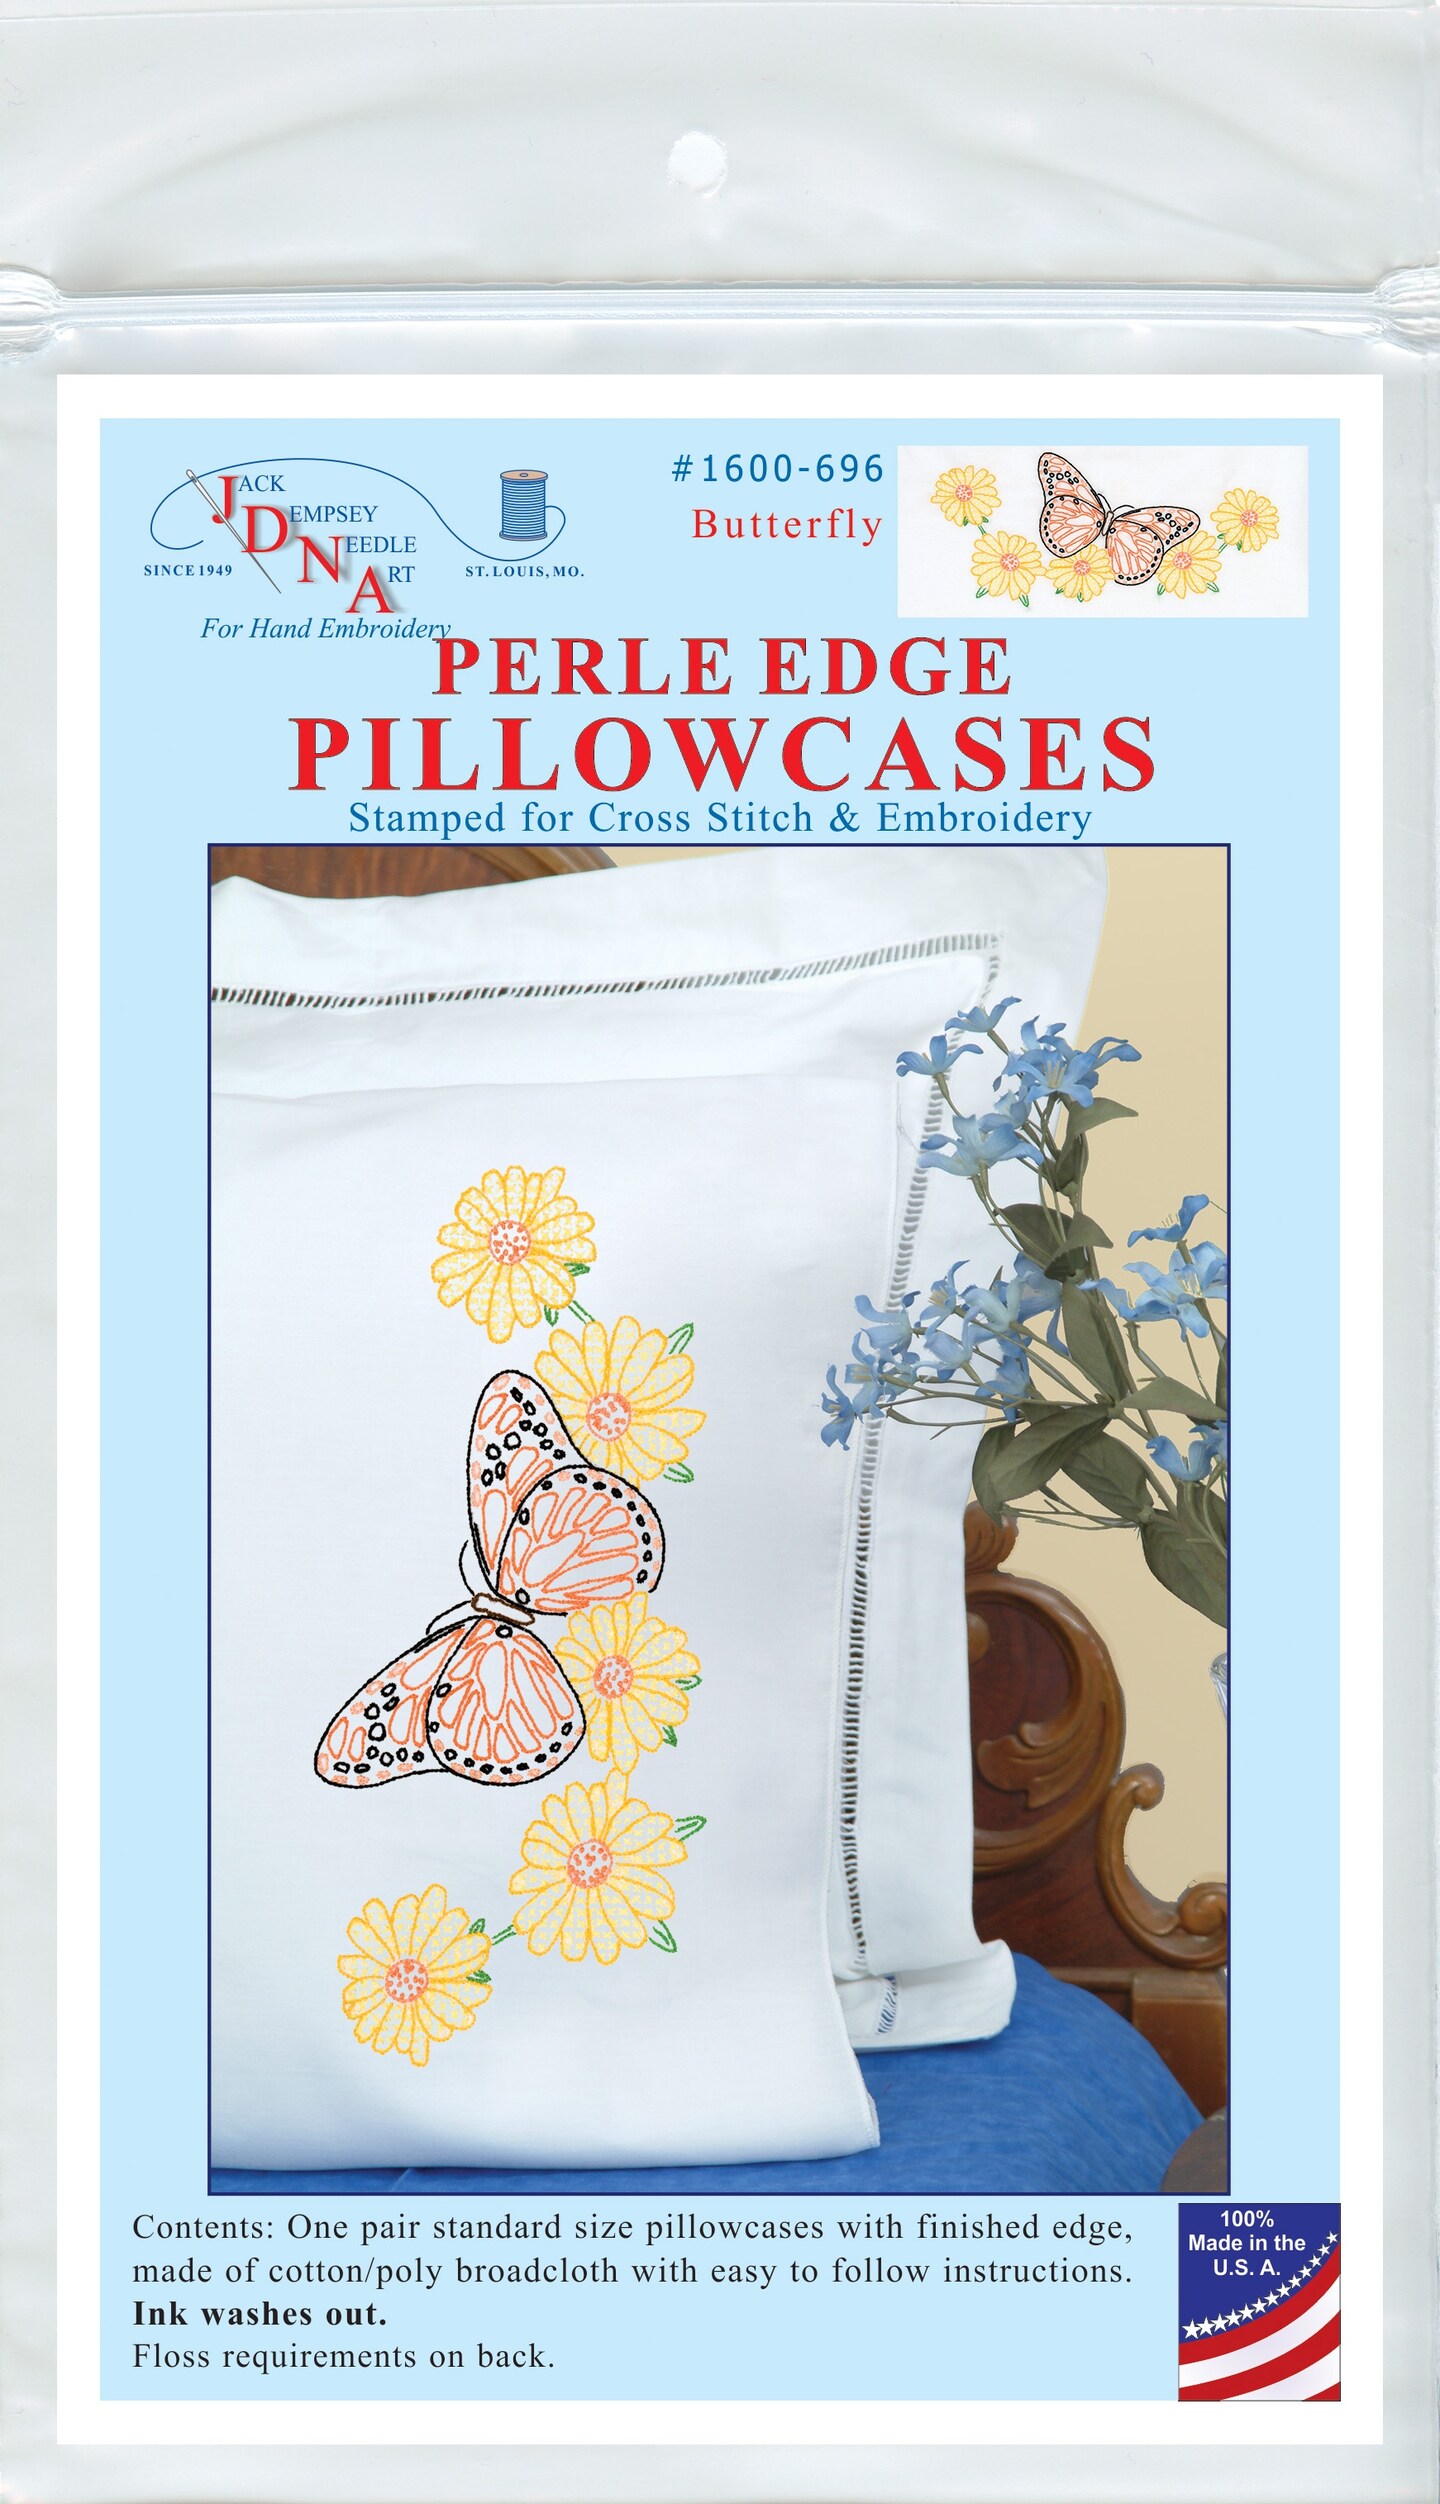 Jack Dempsey Stamped Pillowcases W/White Perle Edge 2/Pkg-Butterfly